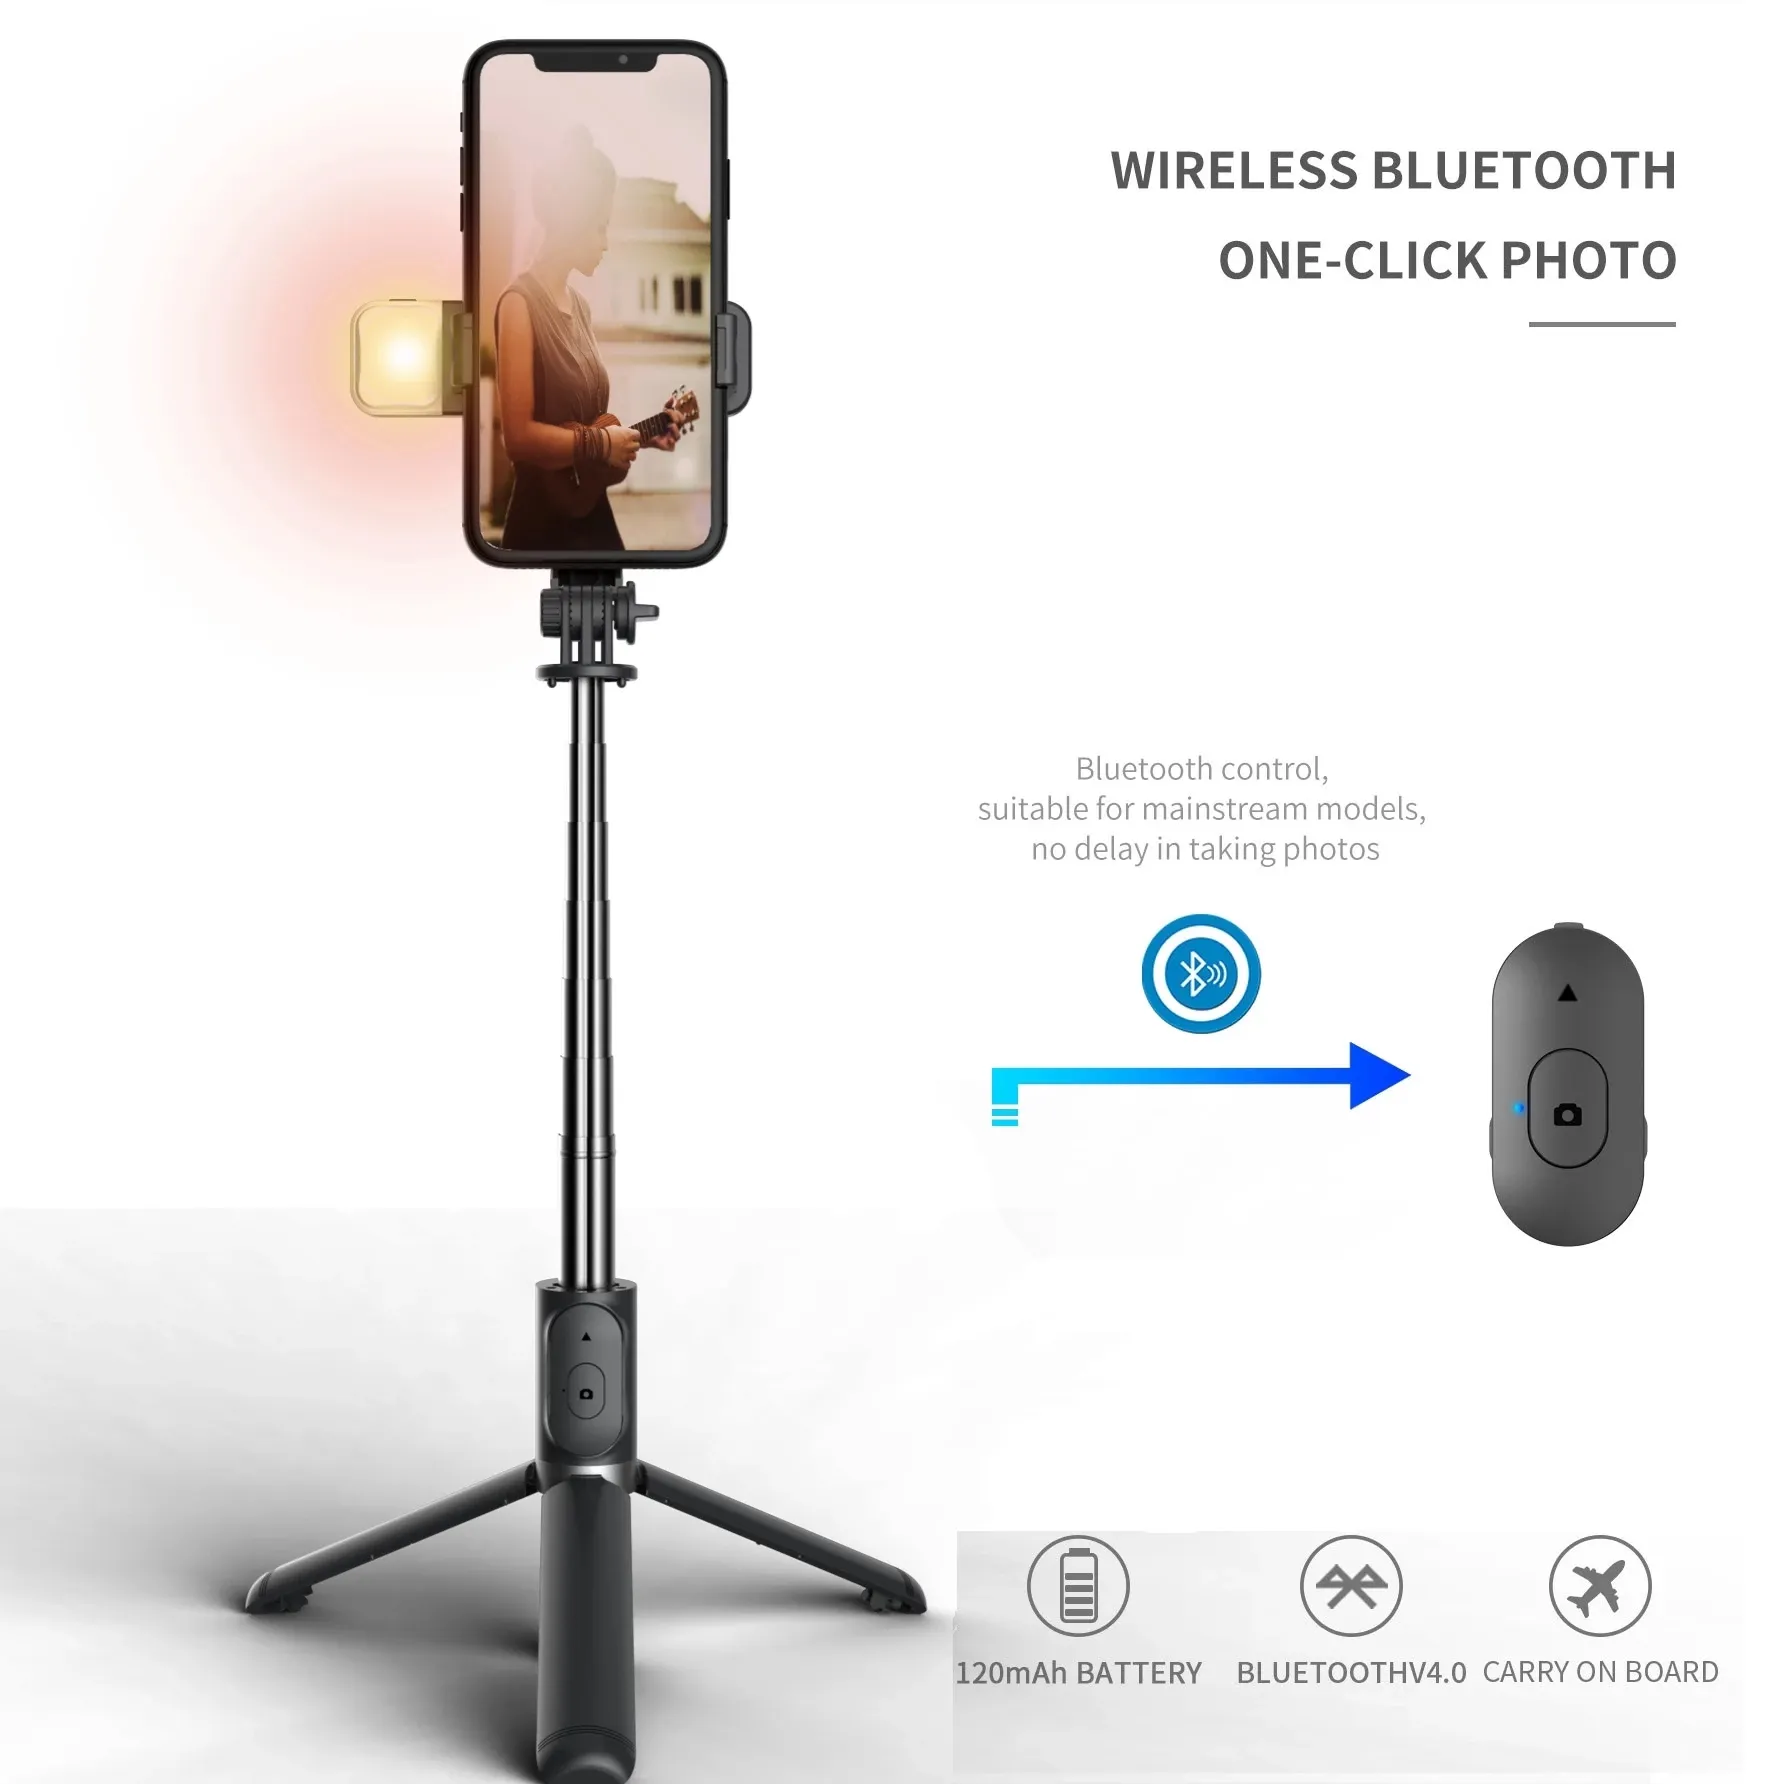 New designer FANGTUOSI Monopod Wireless selfie stick tripod Bluetooth Foldable With Led light remote shutter For iphone Wholesale